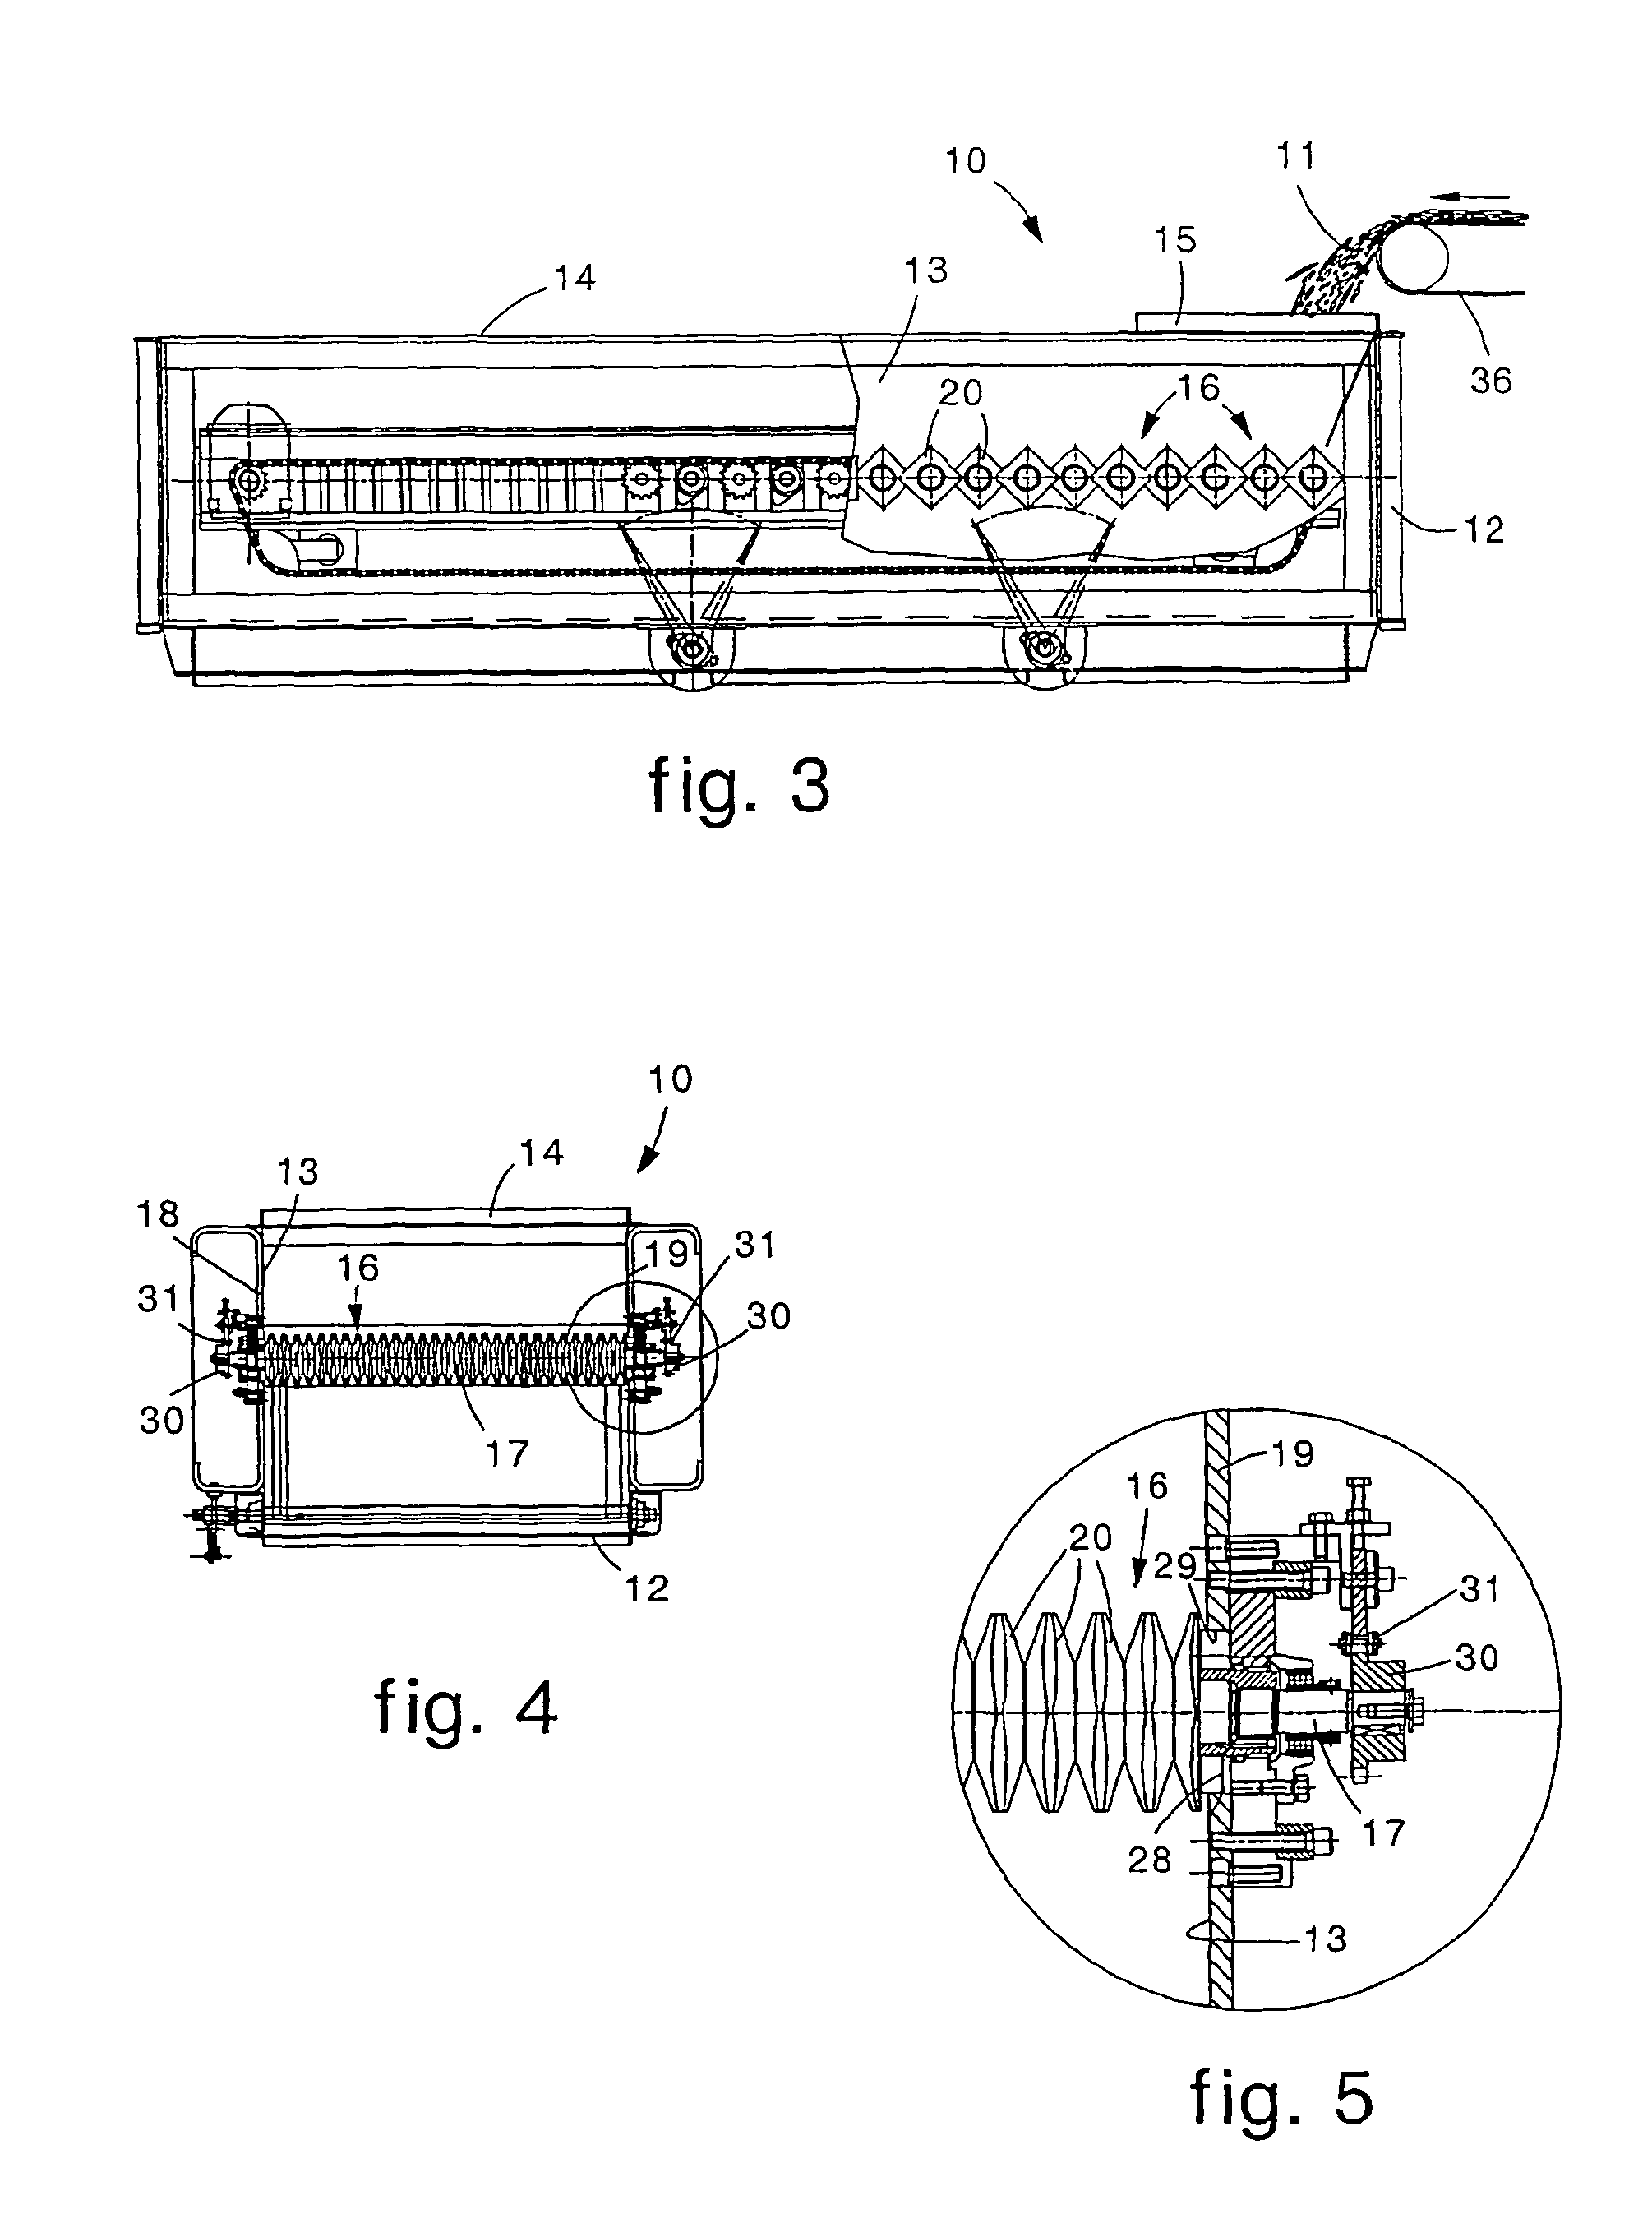 Apparatus and method to separate elements or materials of different sizes